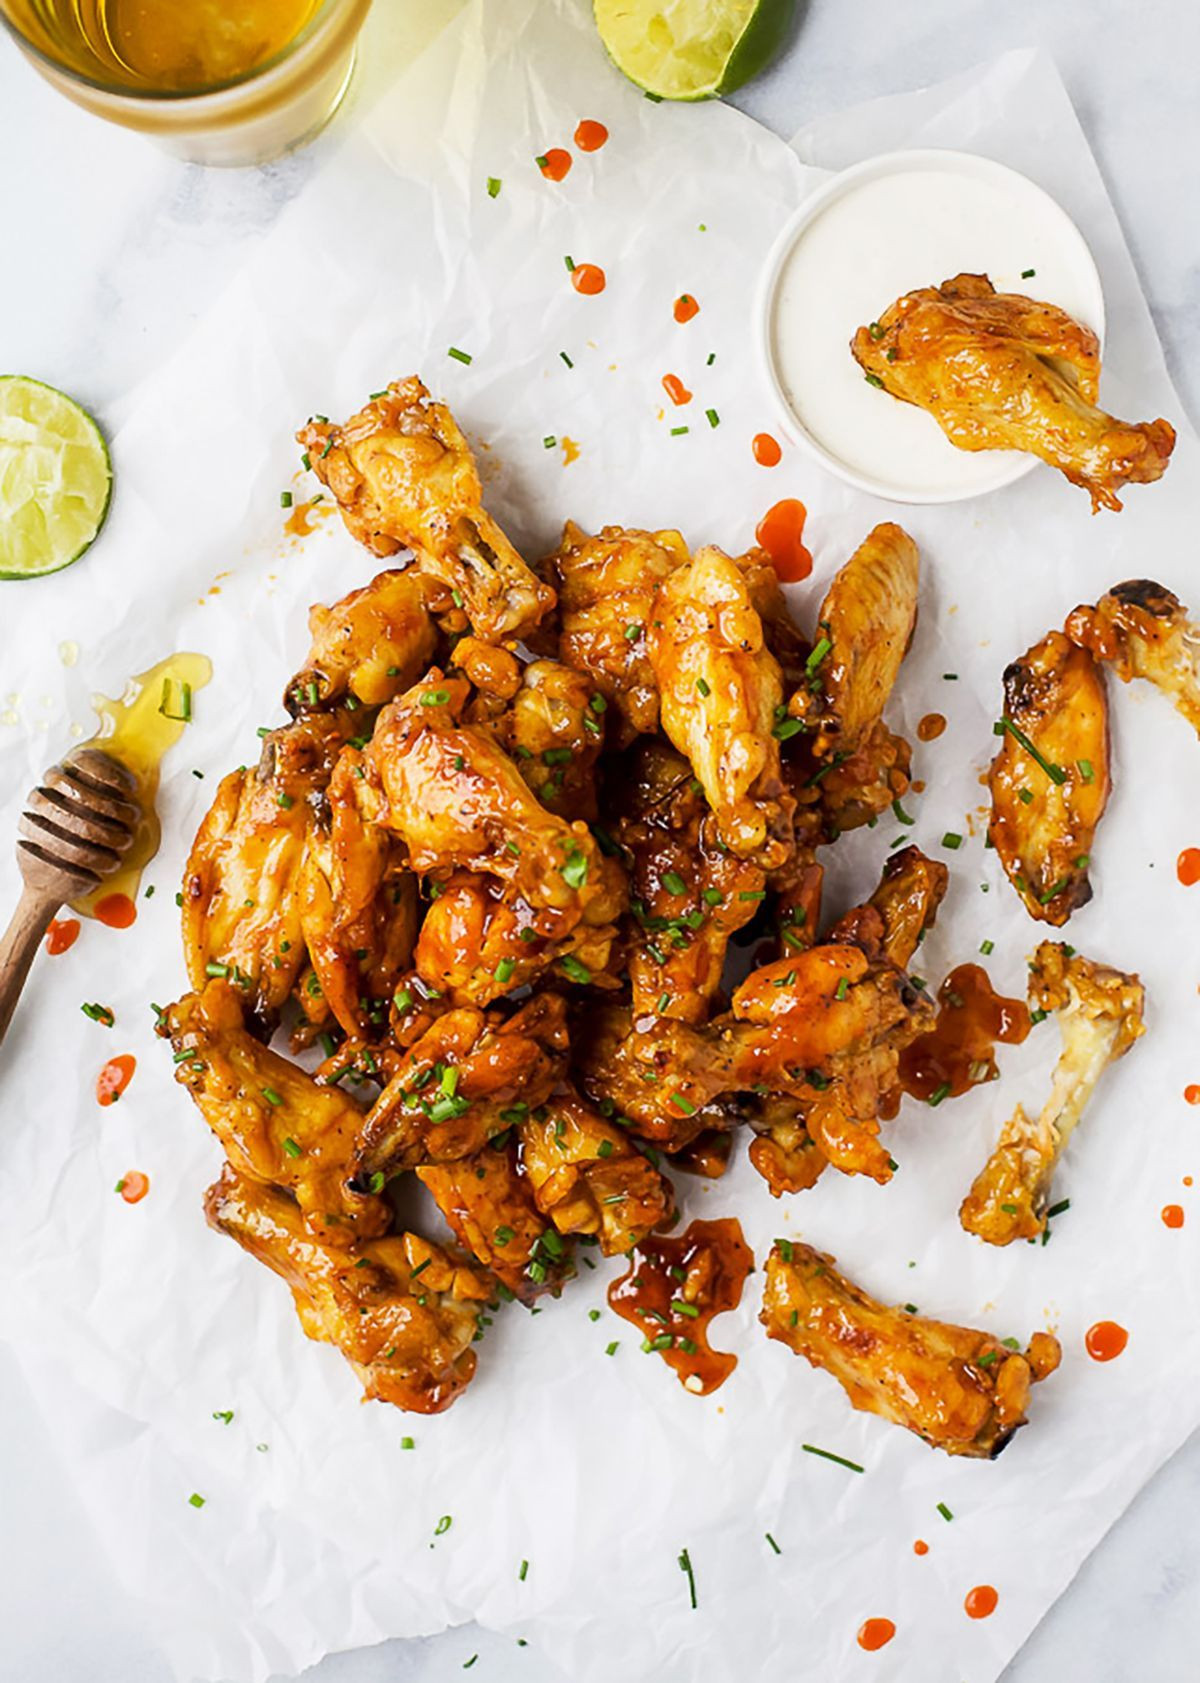 Side Dishes For Chicken Wings
 The 12 Side Dishes for Pizza That Truly plement Our